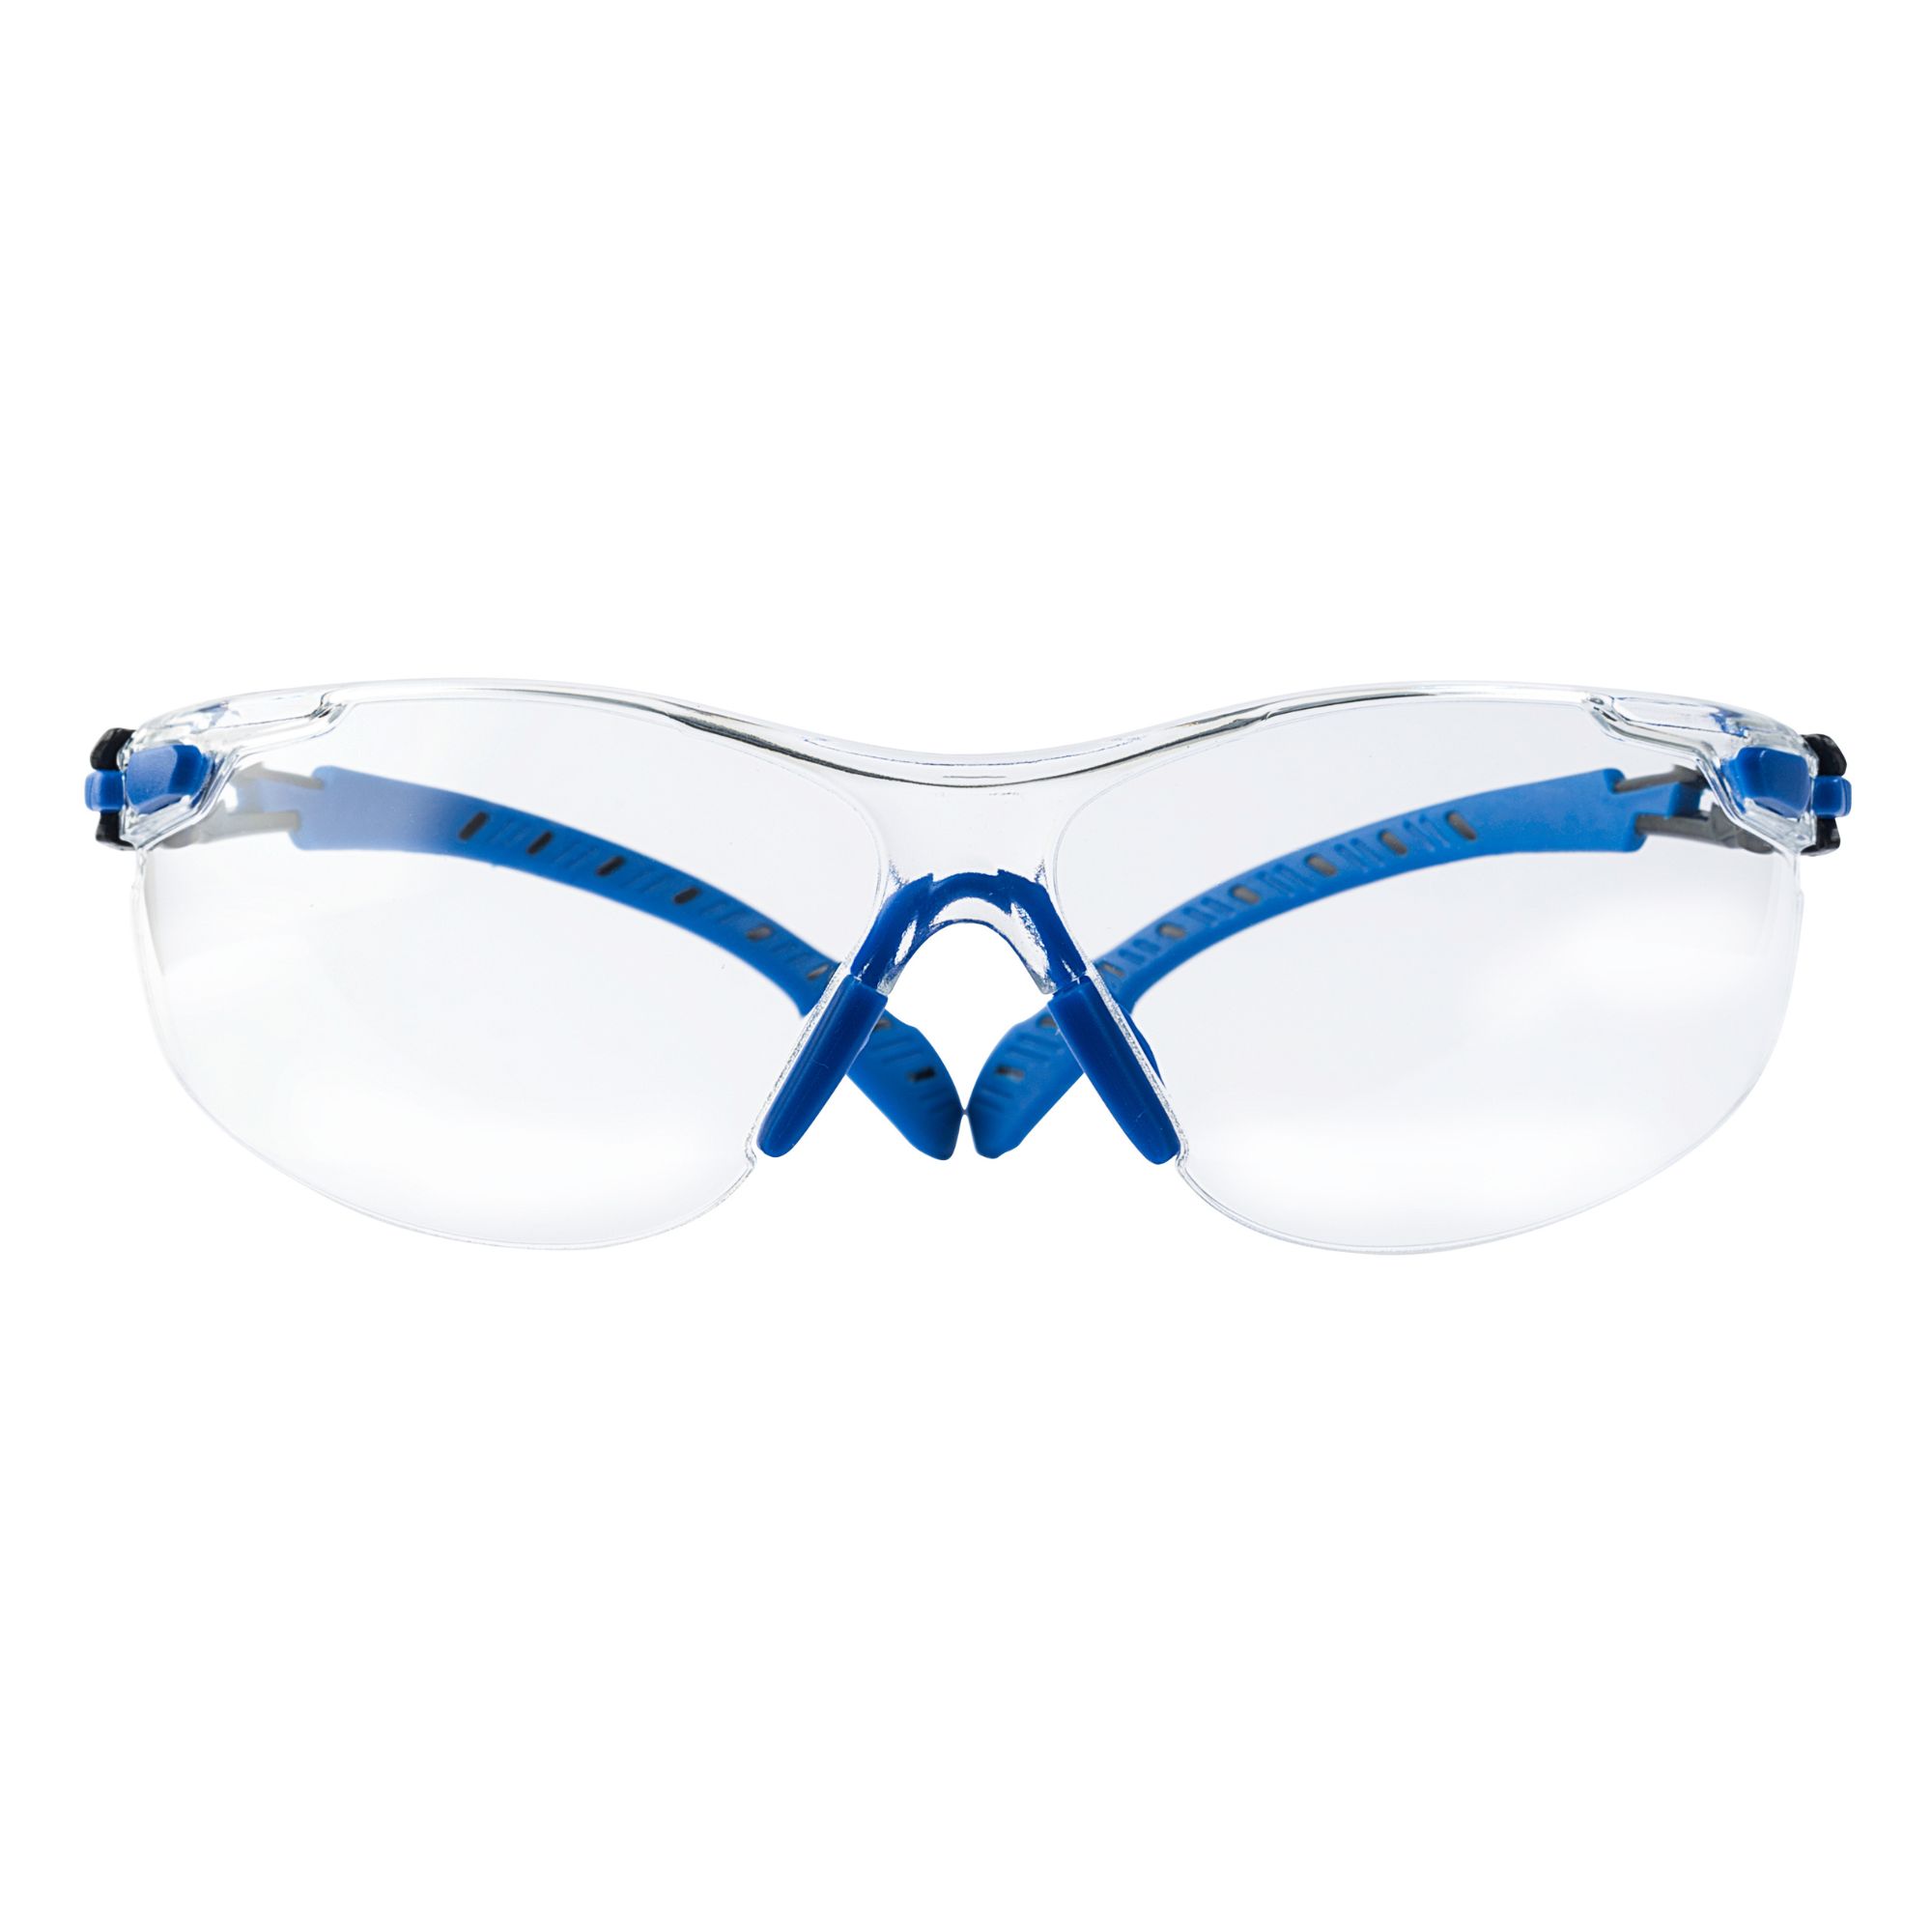 3M Anti-Fog Goggle with Scotchgard Protector (47210H1-VDC-PS)